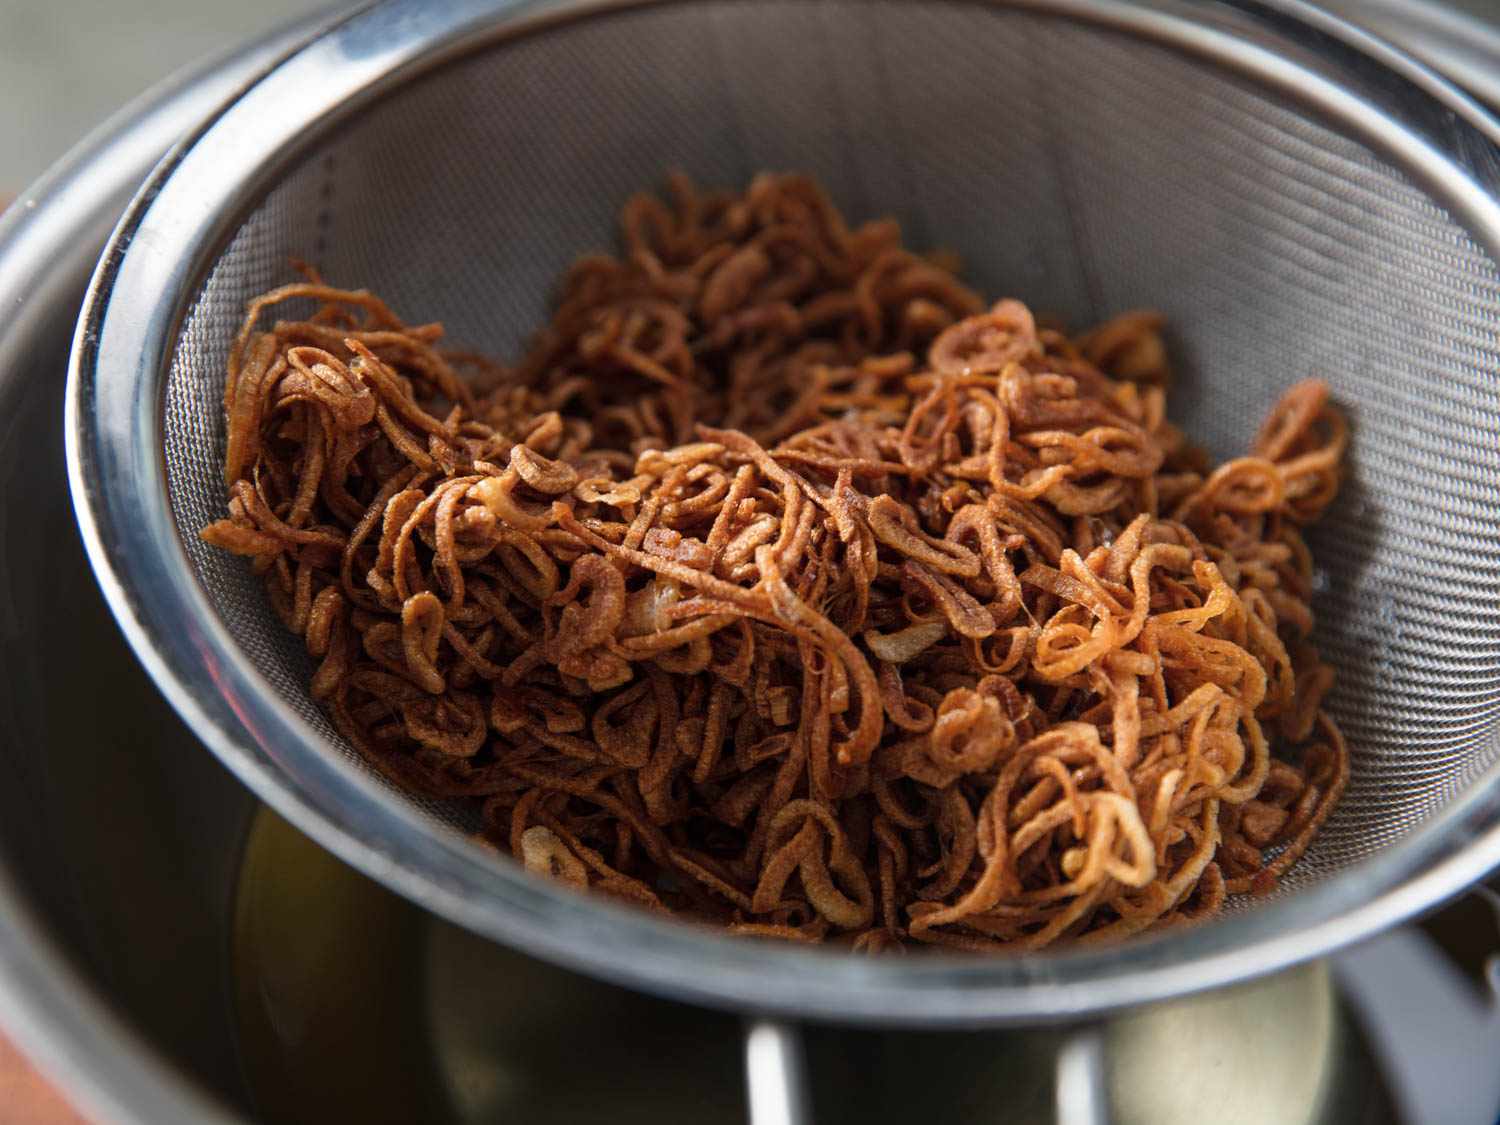 Crispy fried shallots in a metal strainer